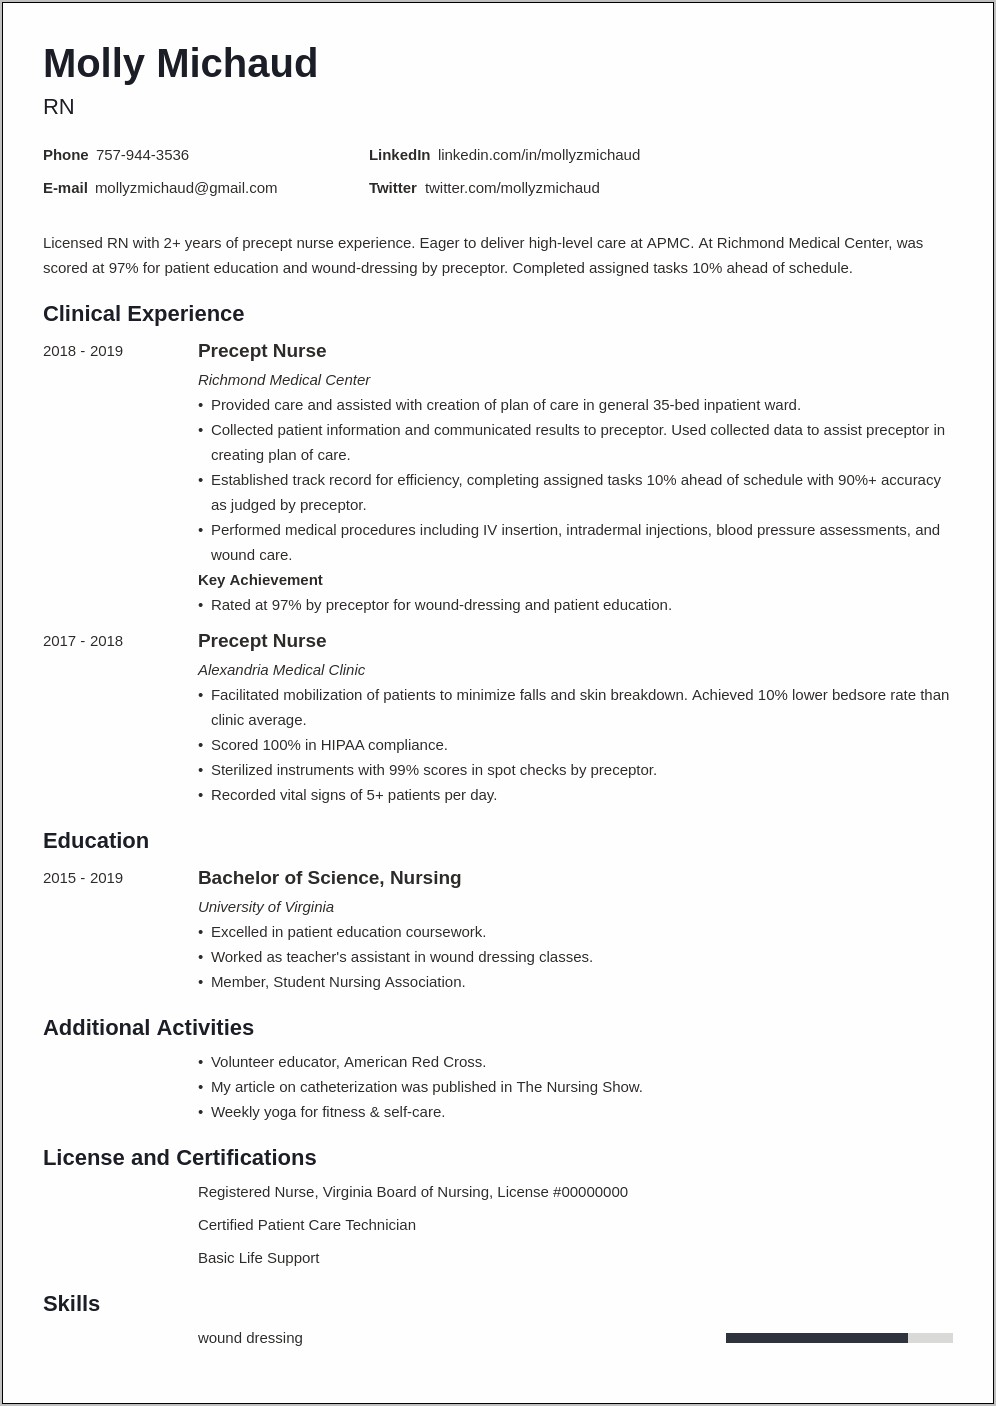 Resume Objective Examples For Entry Level Healthcare